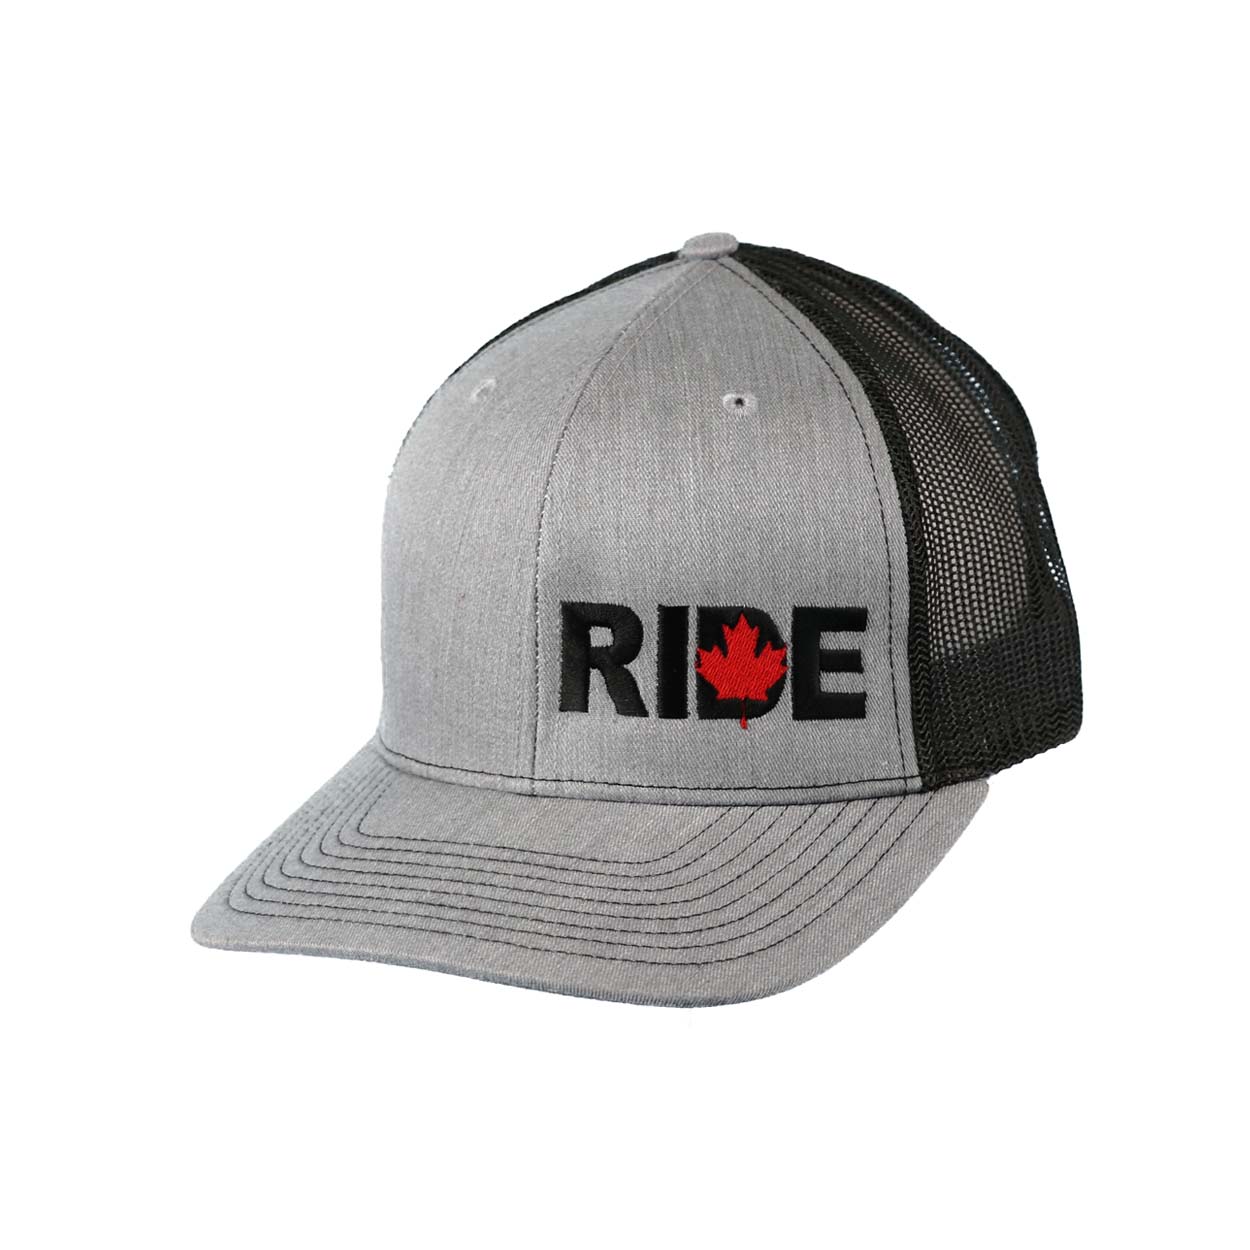 Ride Canada Night Out Pro Embroidered Snapback Trucker Hat Heather Gray/Black